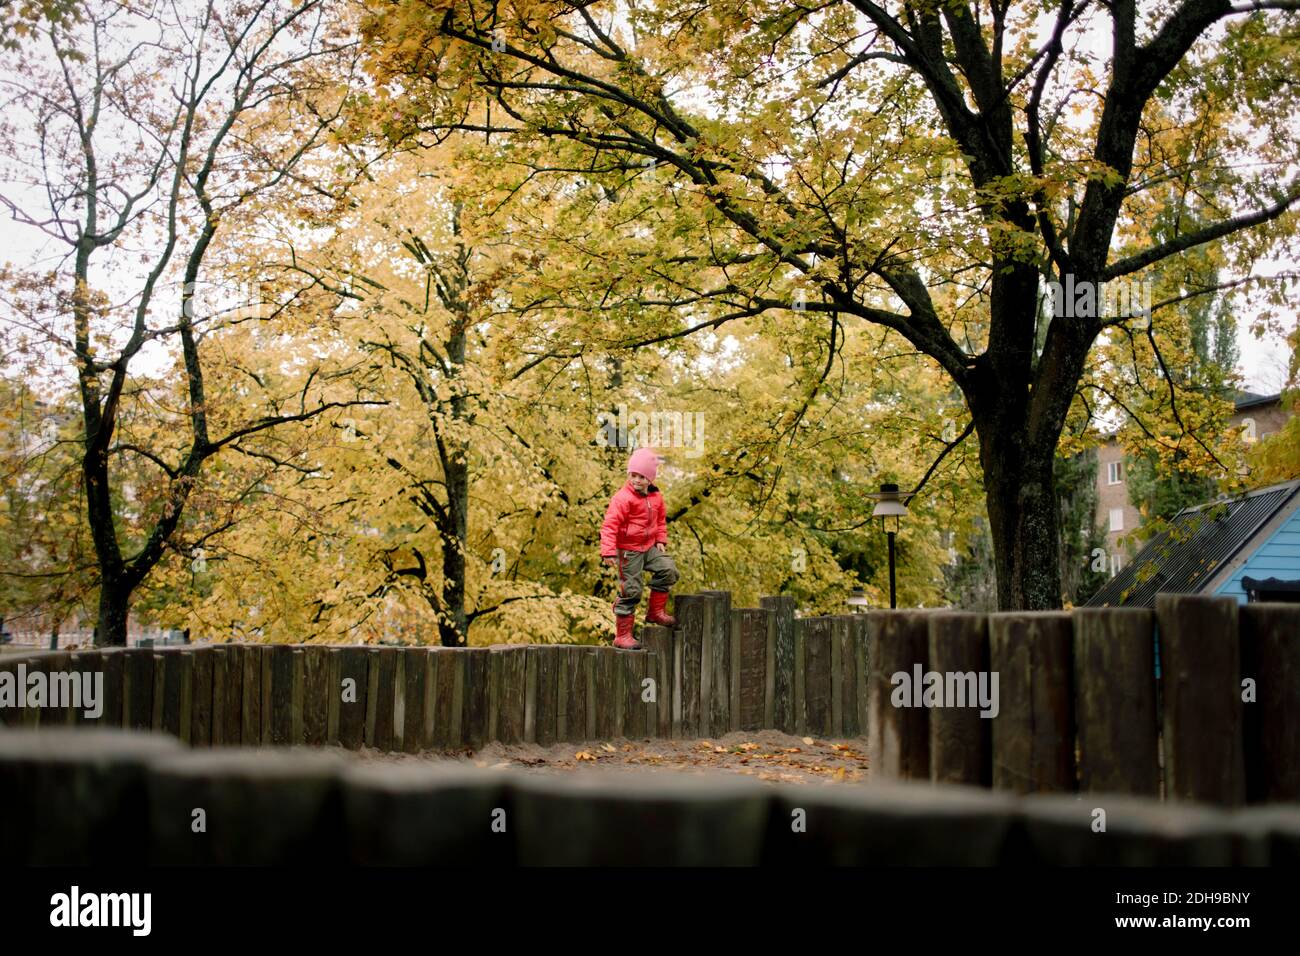 Boy standing on wooden fence against autumn trees Stock Photo